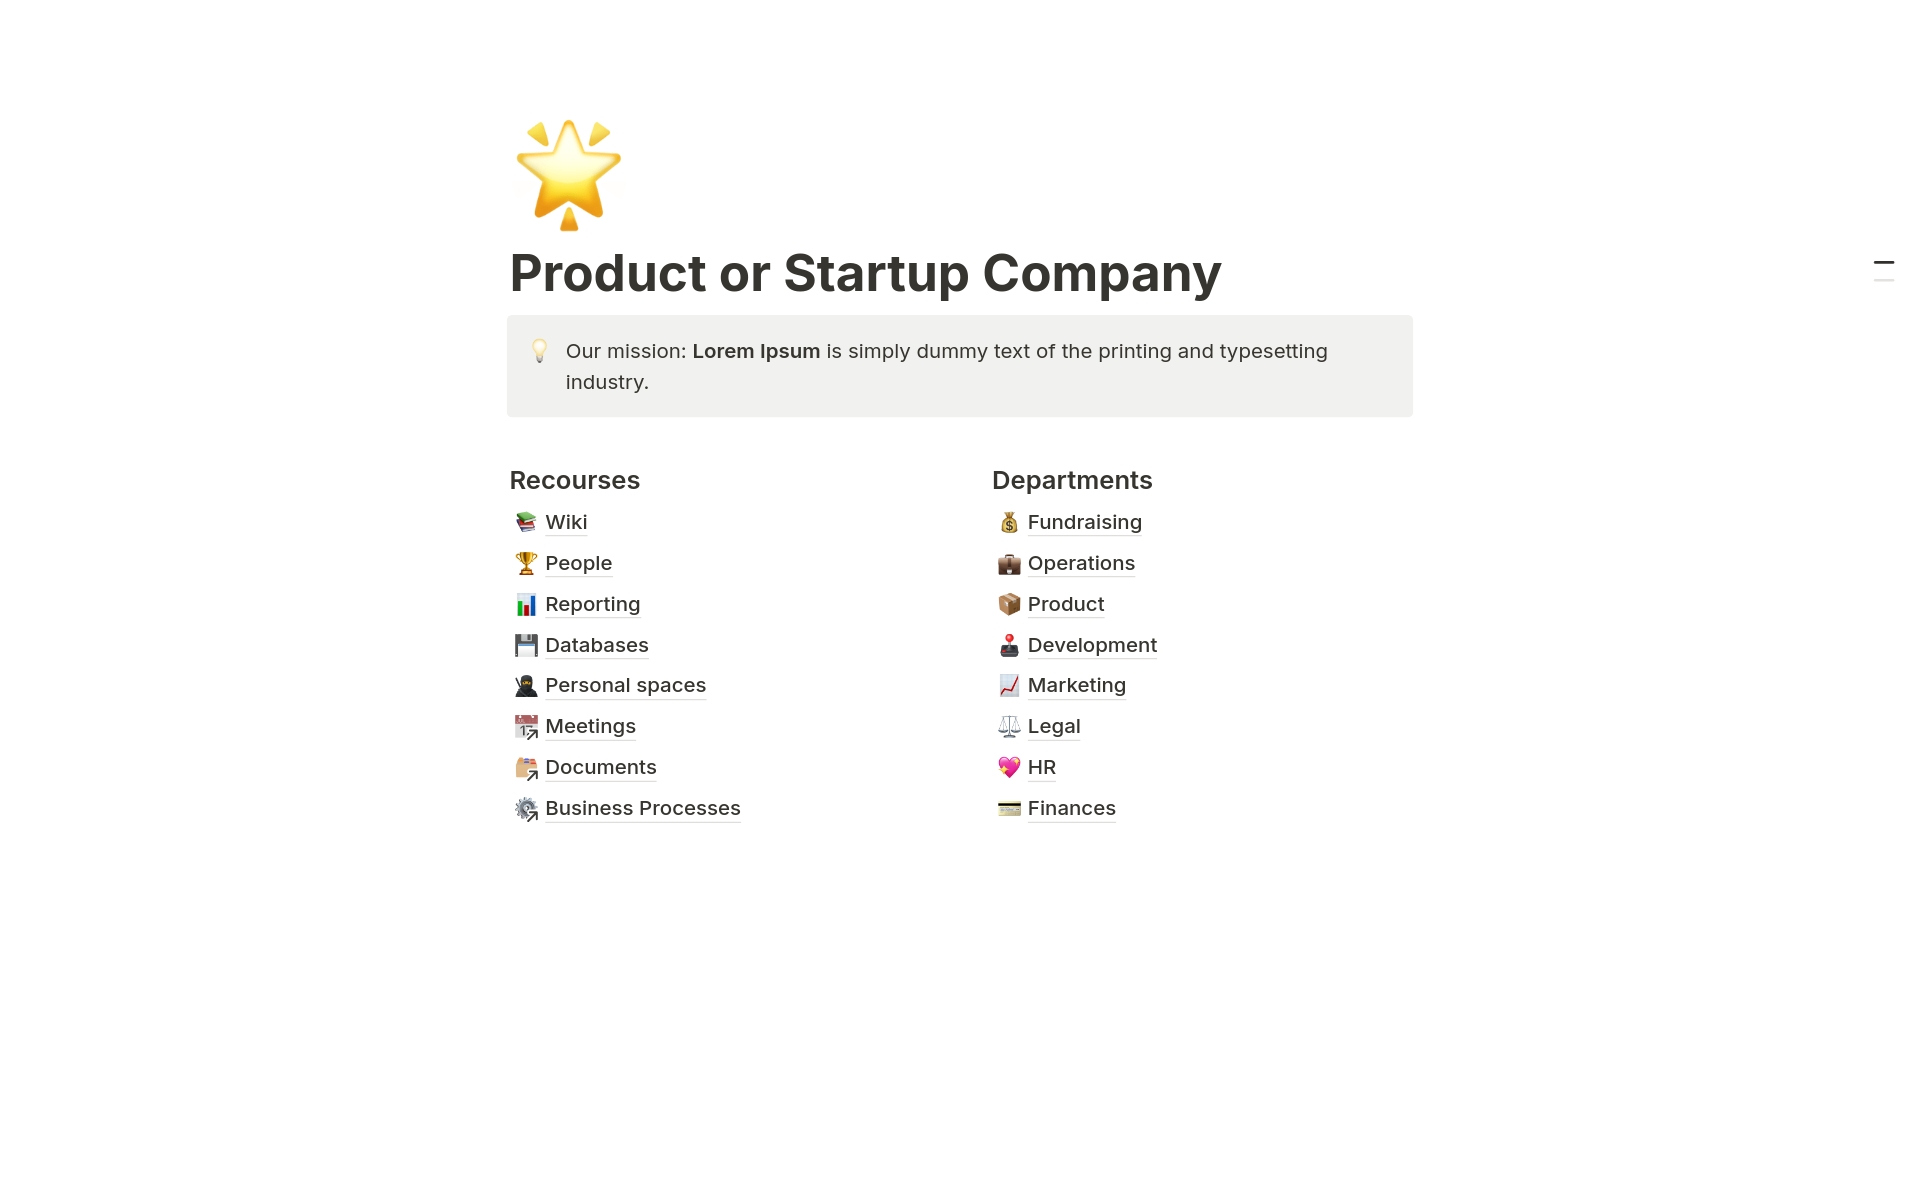 This Notion template is designed for product companies and startups looking to efficiently organize their work and speed up processes. It helps to structure and manage the operational part of the business for different departments